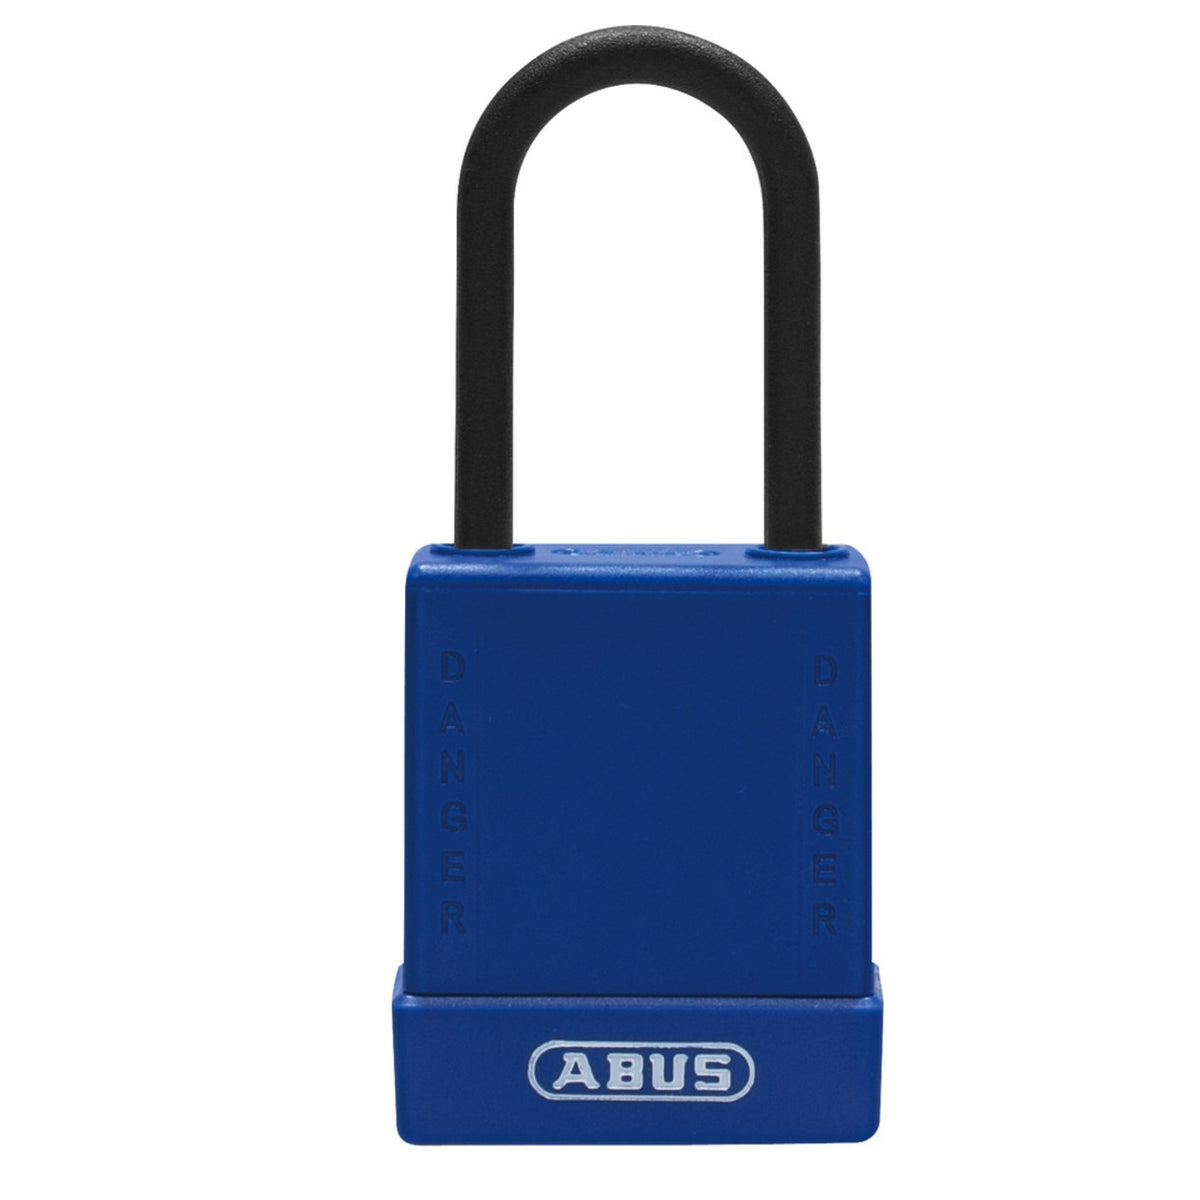 Abus 76PS/40 Blue High Security Lockout Tagout Safety Locks - The Lock Source